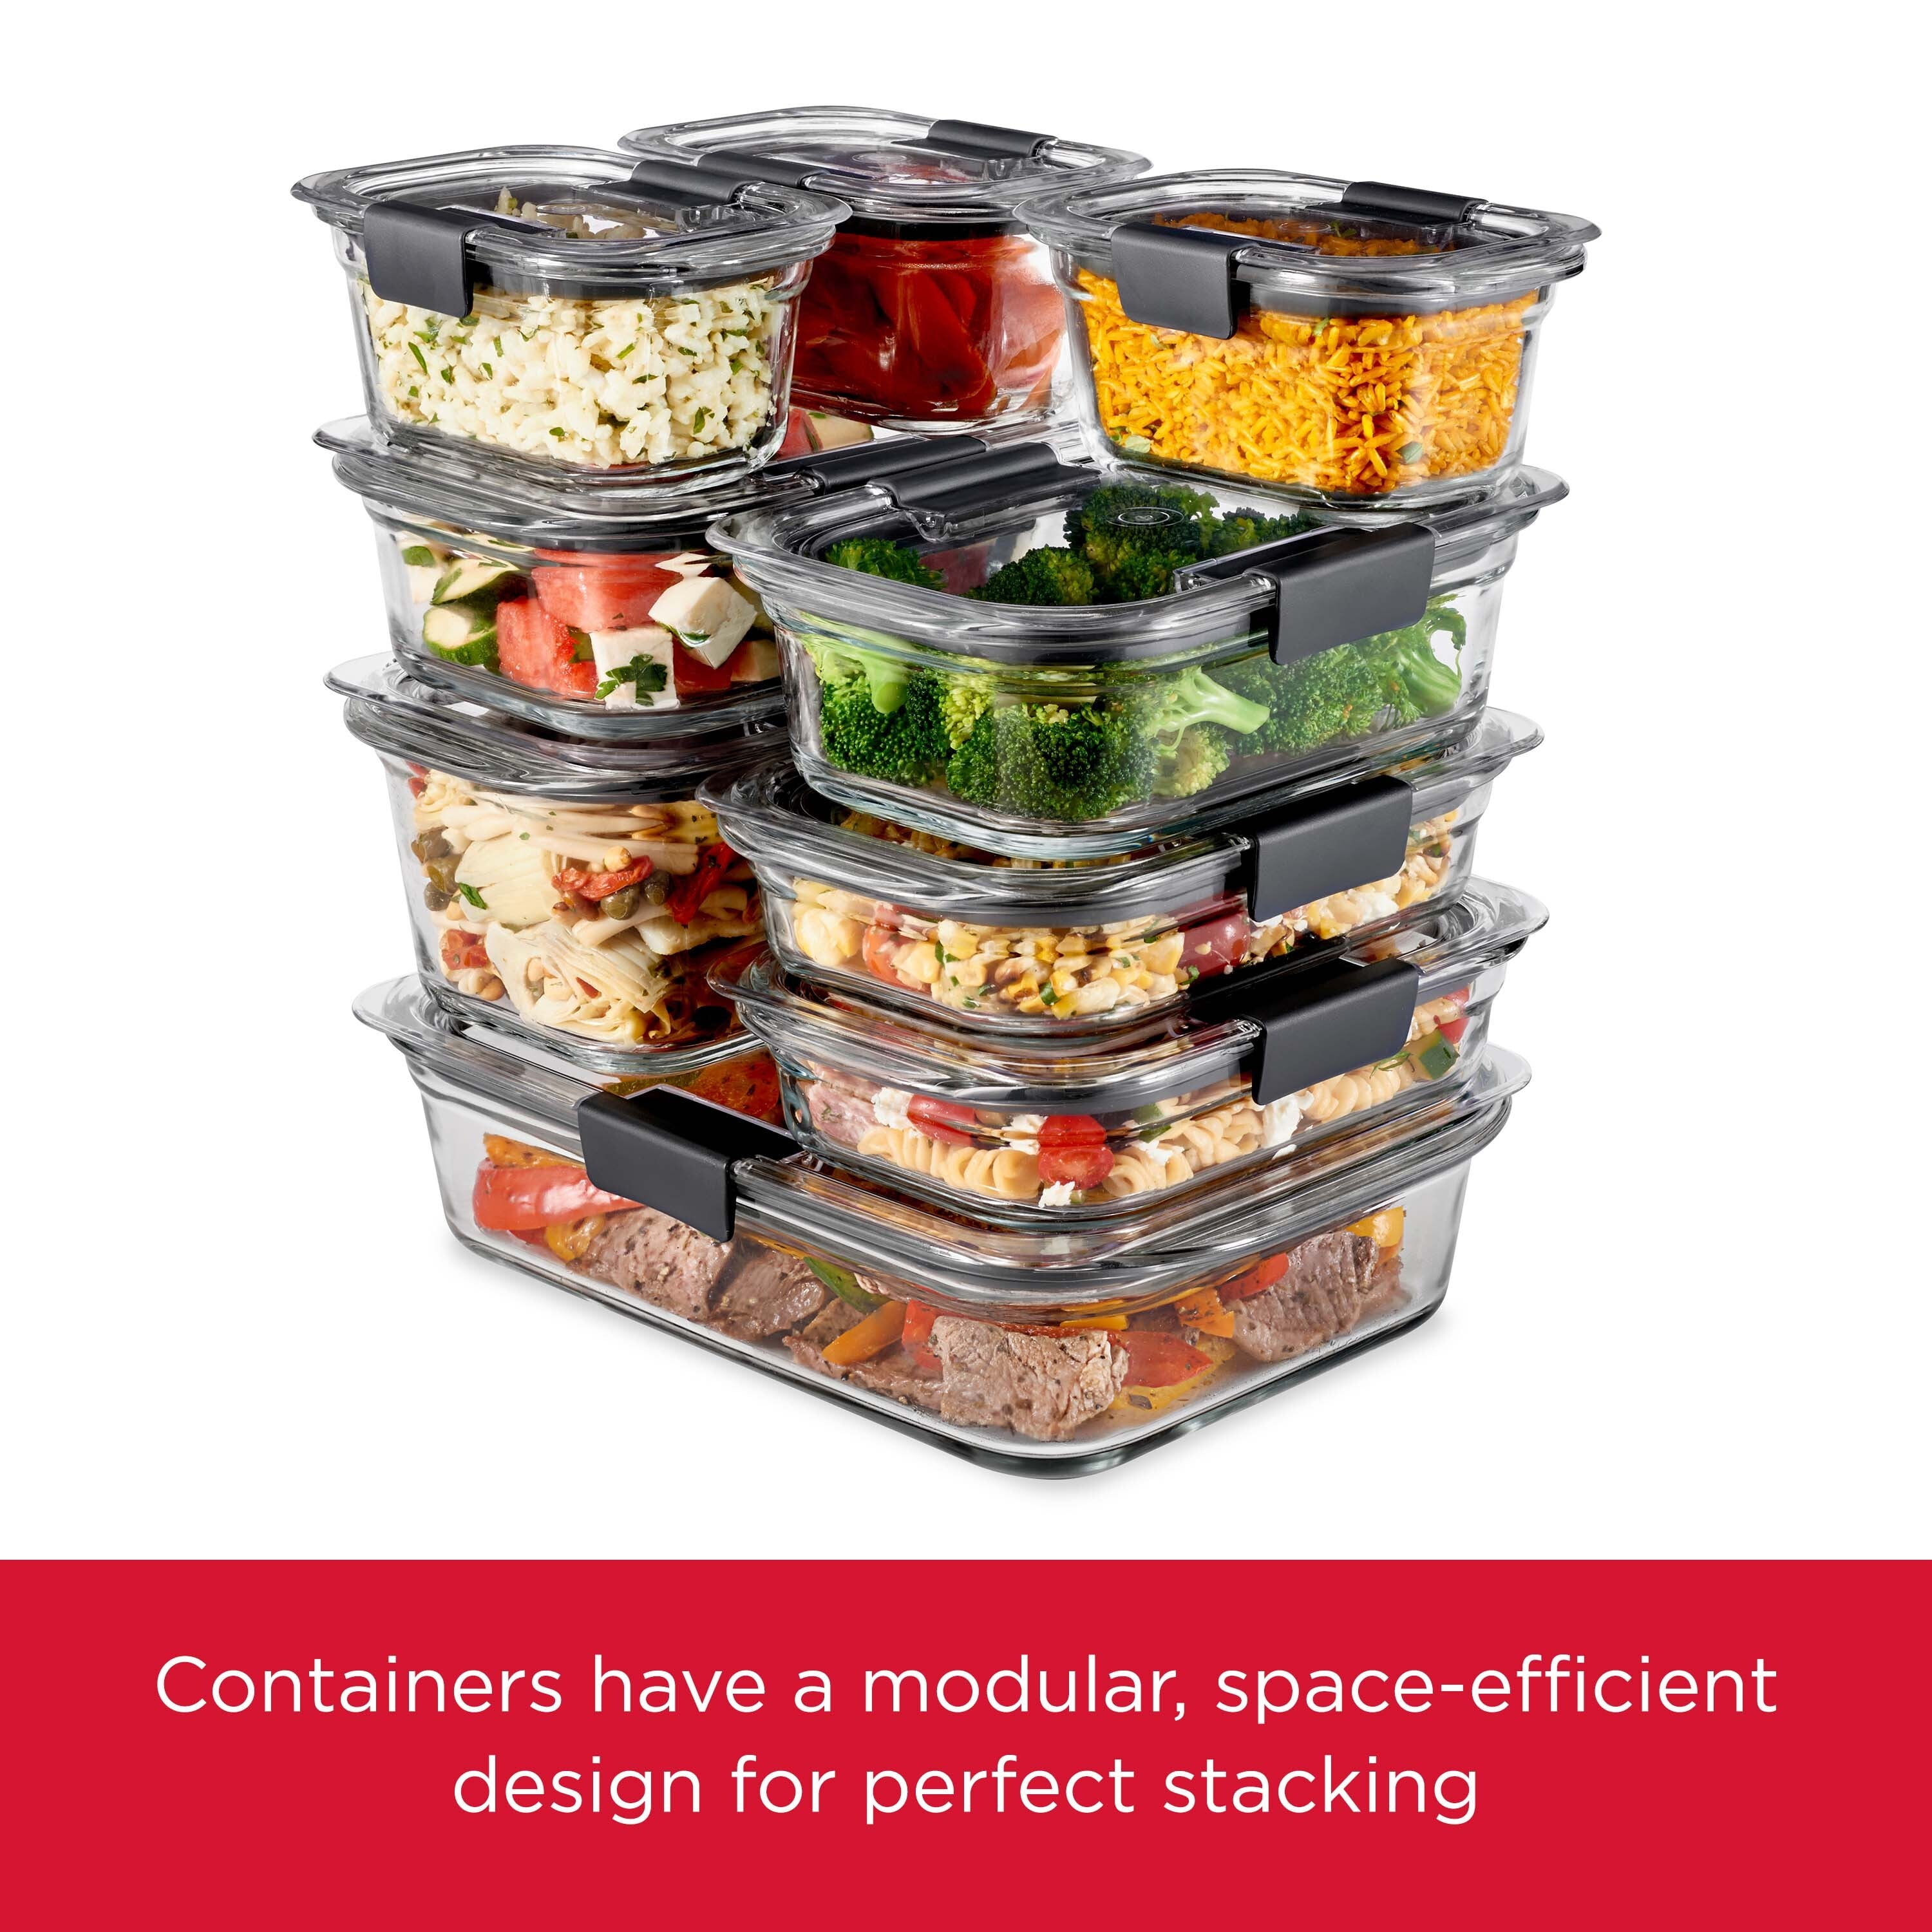 Best Sustainable Glass Storage Containers: Rubbermaid Brilliance